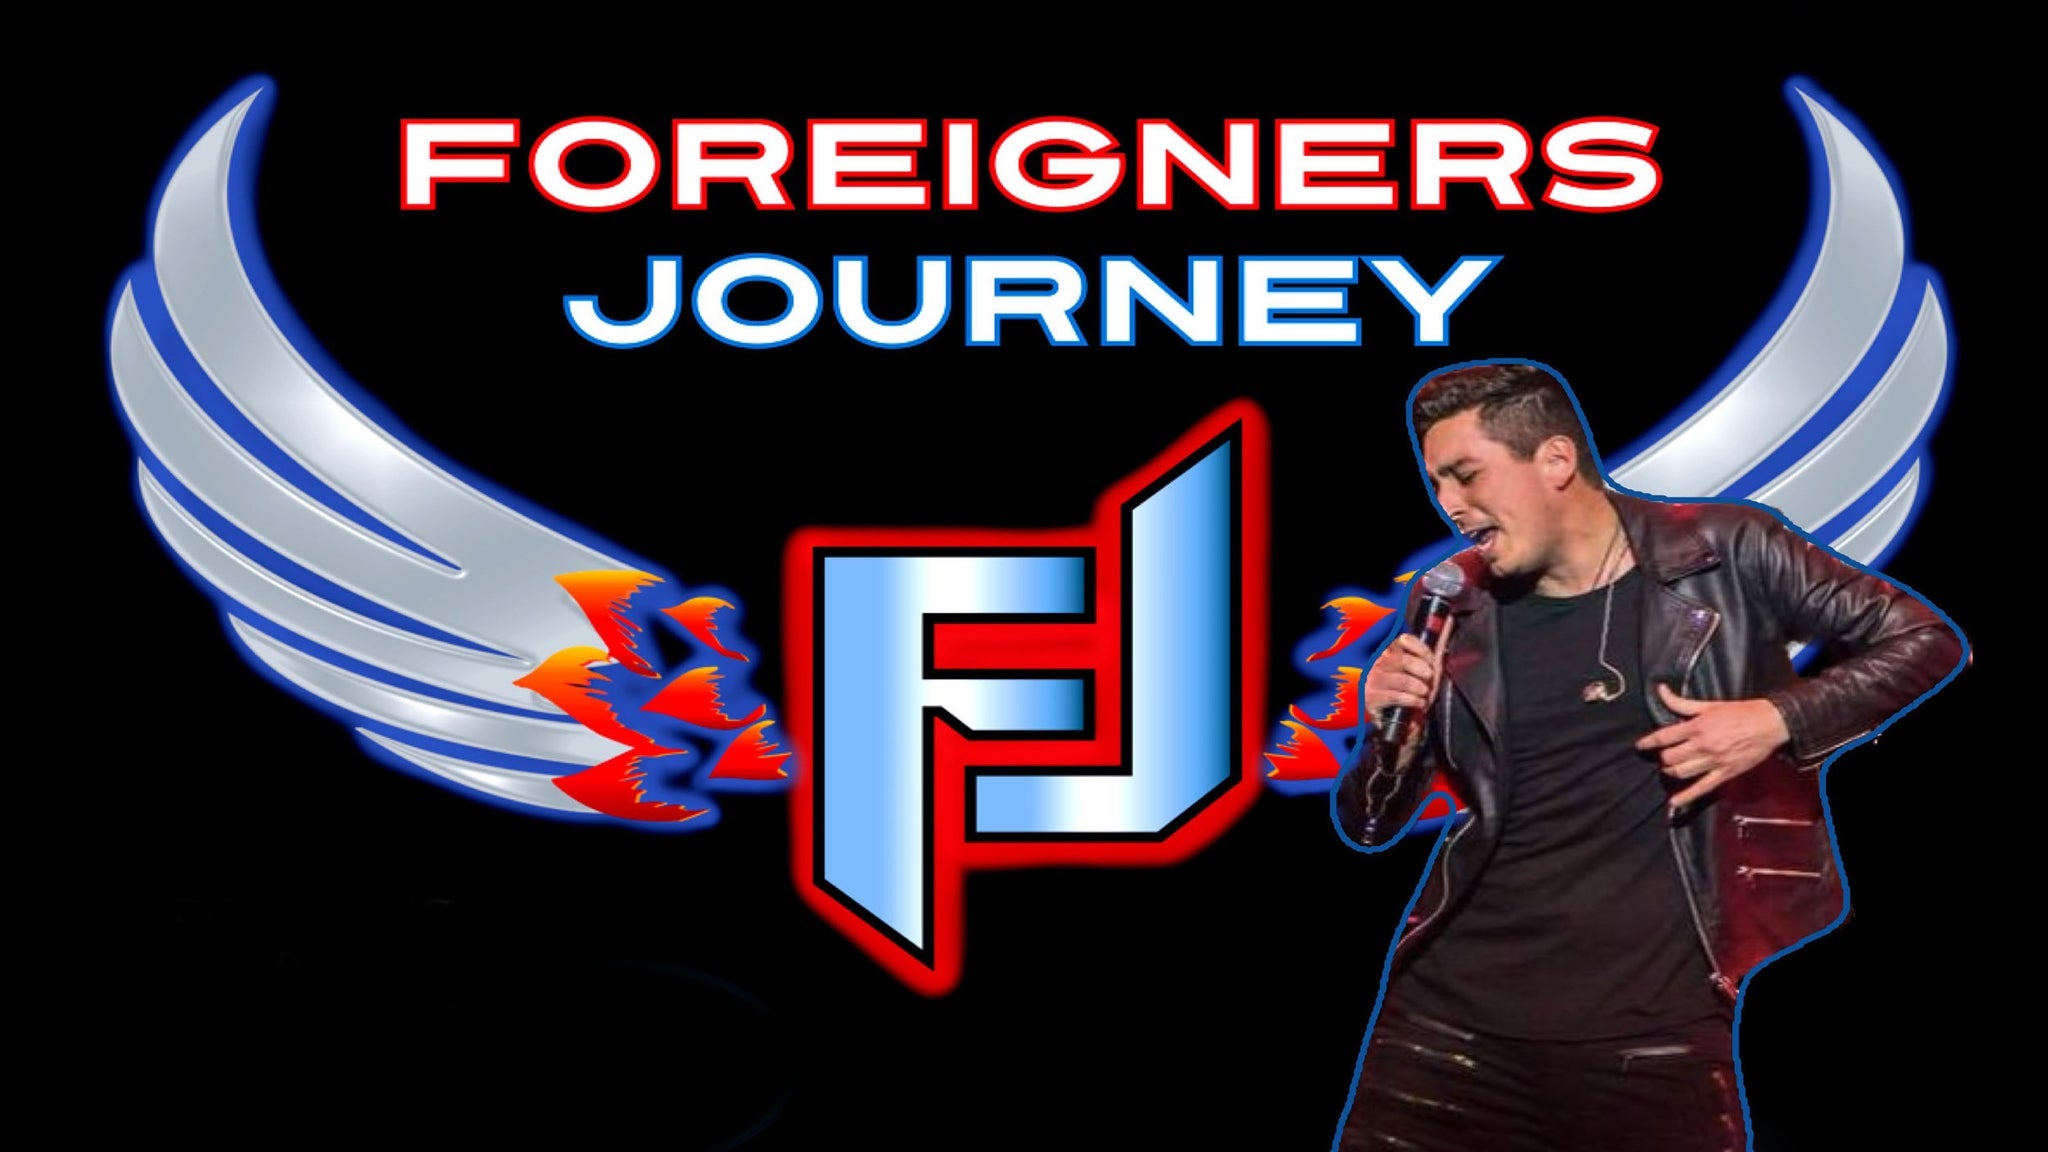 Foreigners Journey Tickets, 2023 Concert Tour Dates Ticketmaster